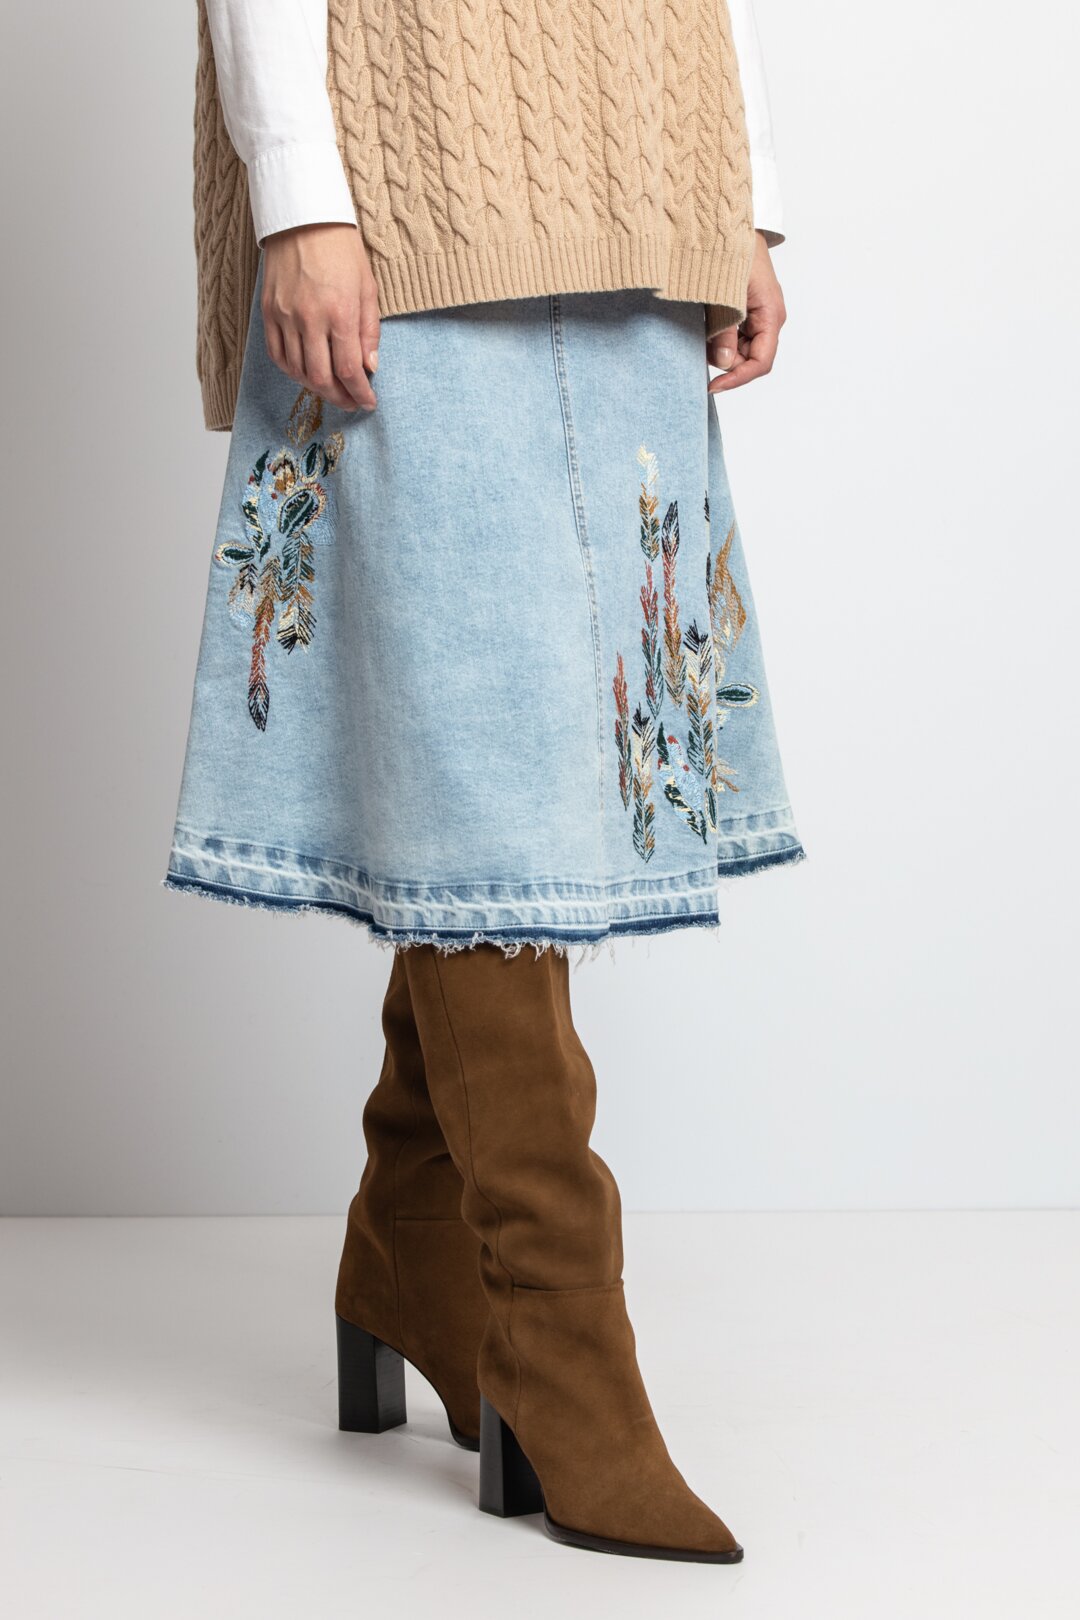 Jeans Skirt with Embroidery